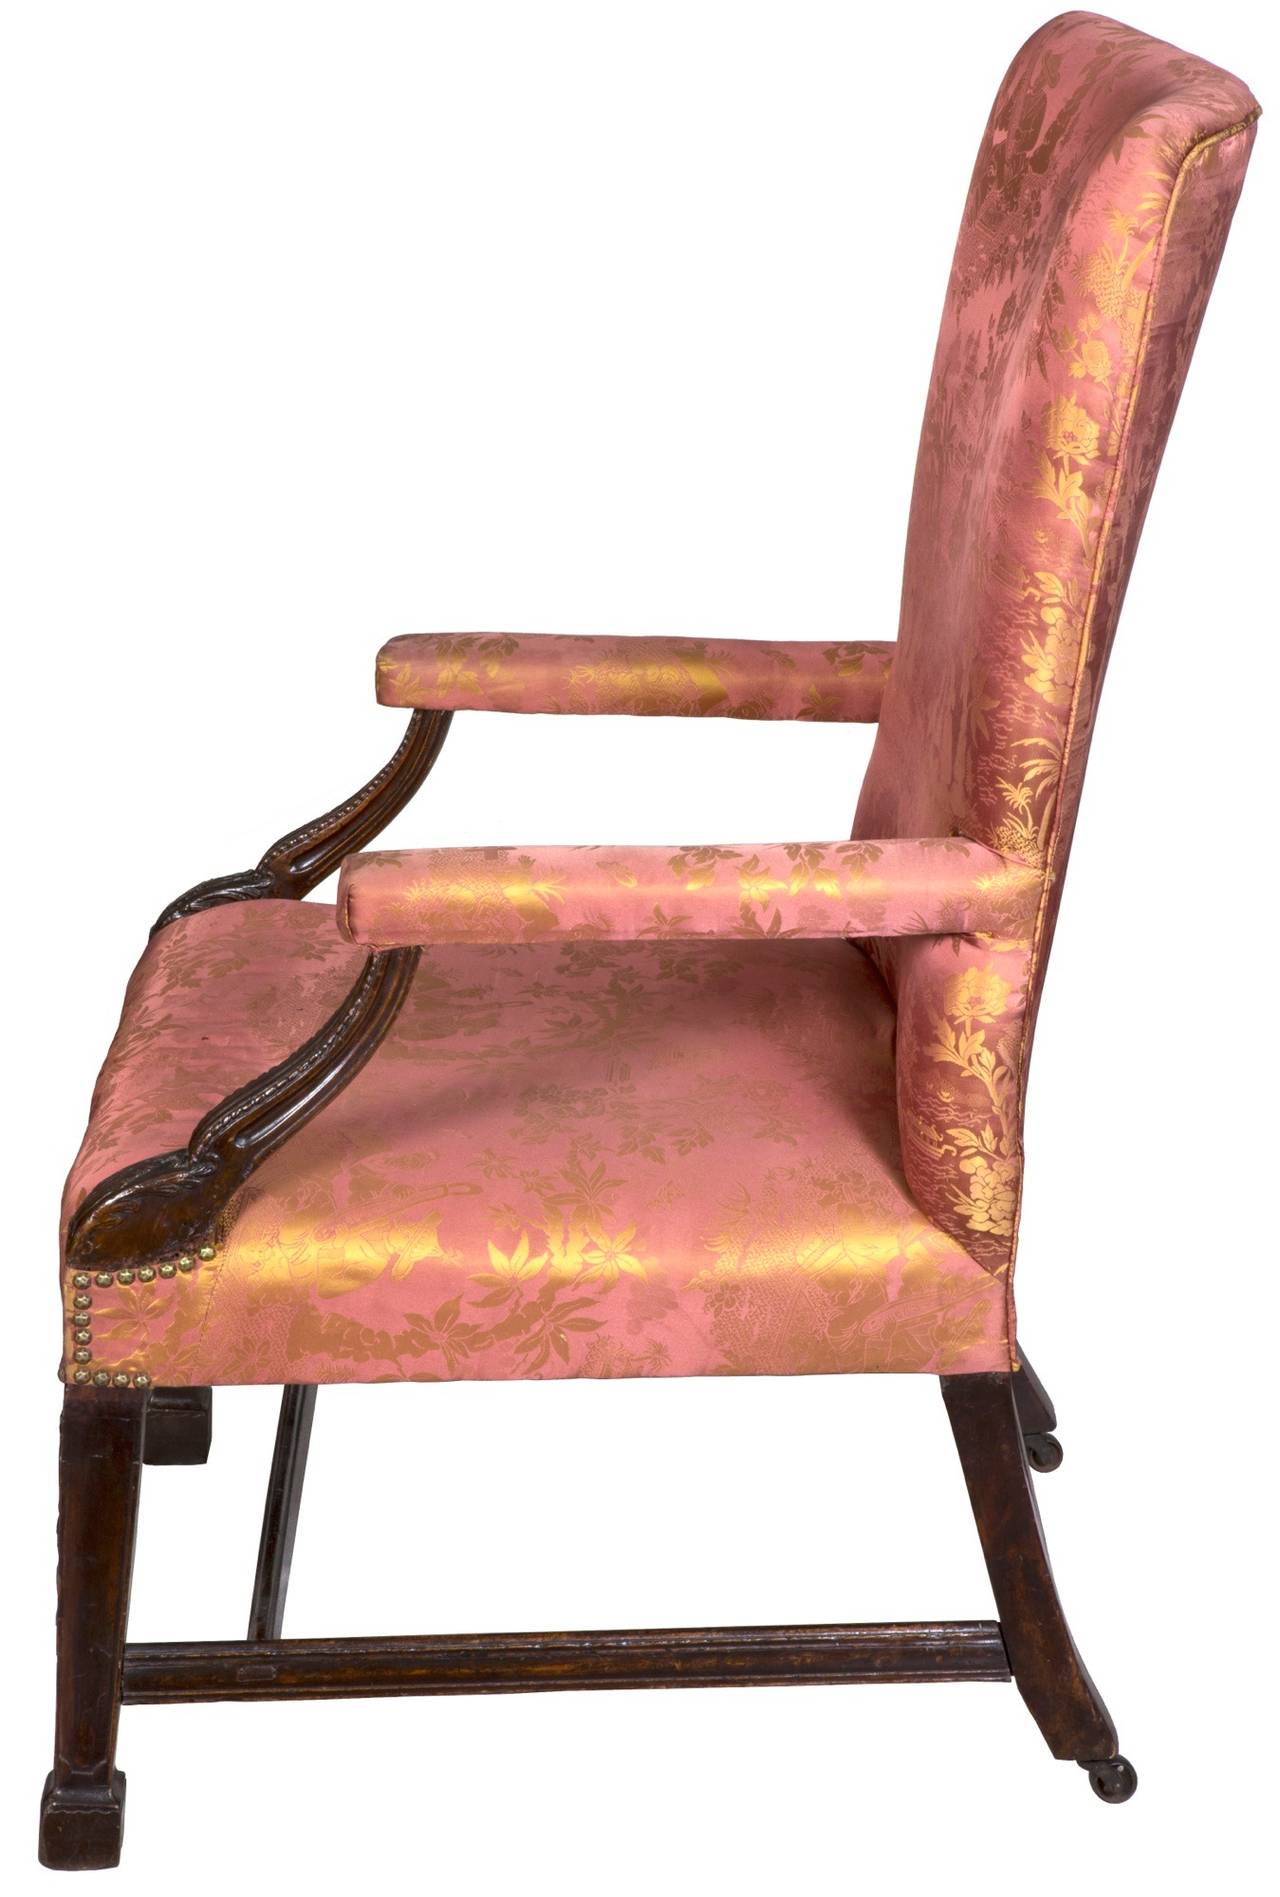 Mid-18th Century Chippendale or George II Carved Mahogany Armchair with Marlboro Legs, circa 1780